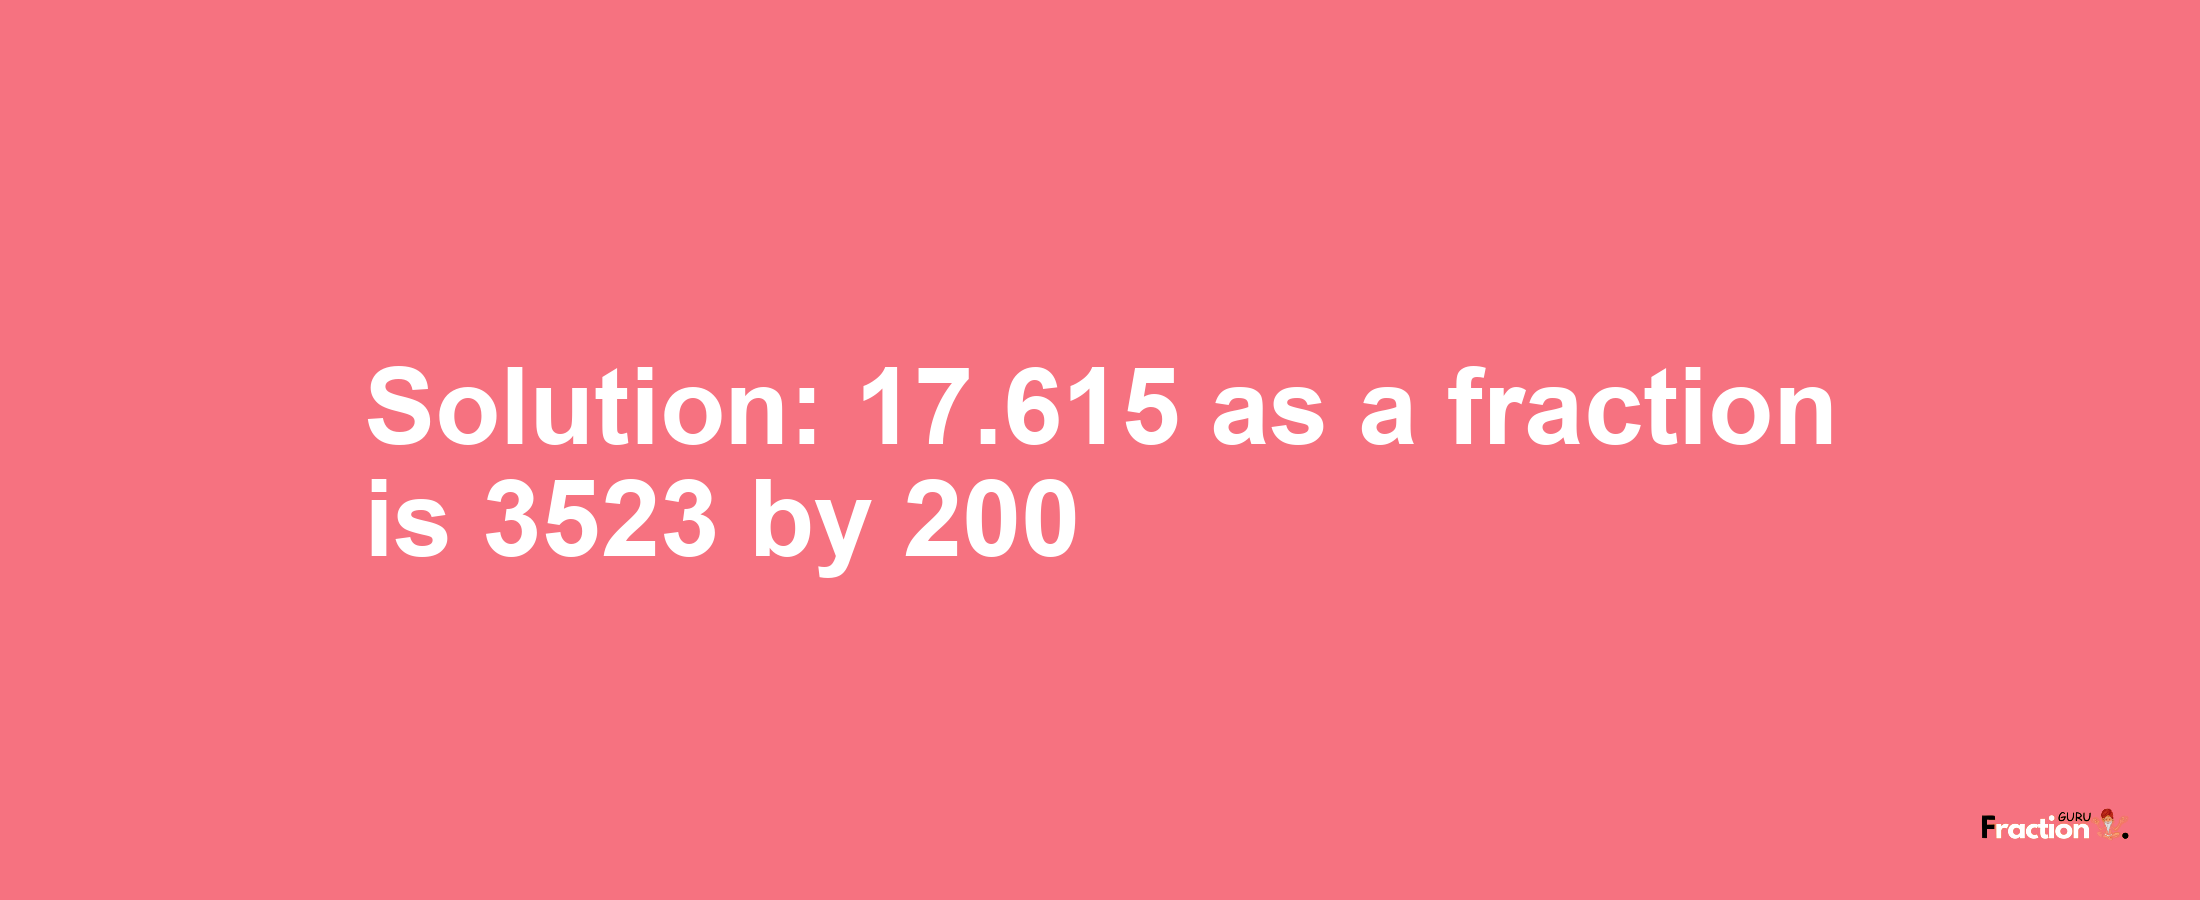 Solution:17.615 as a fraction is 3523/200